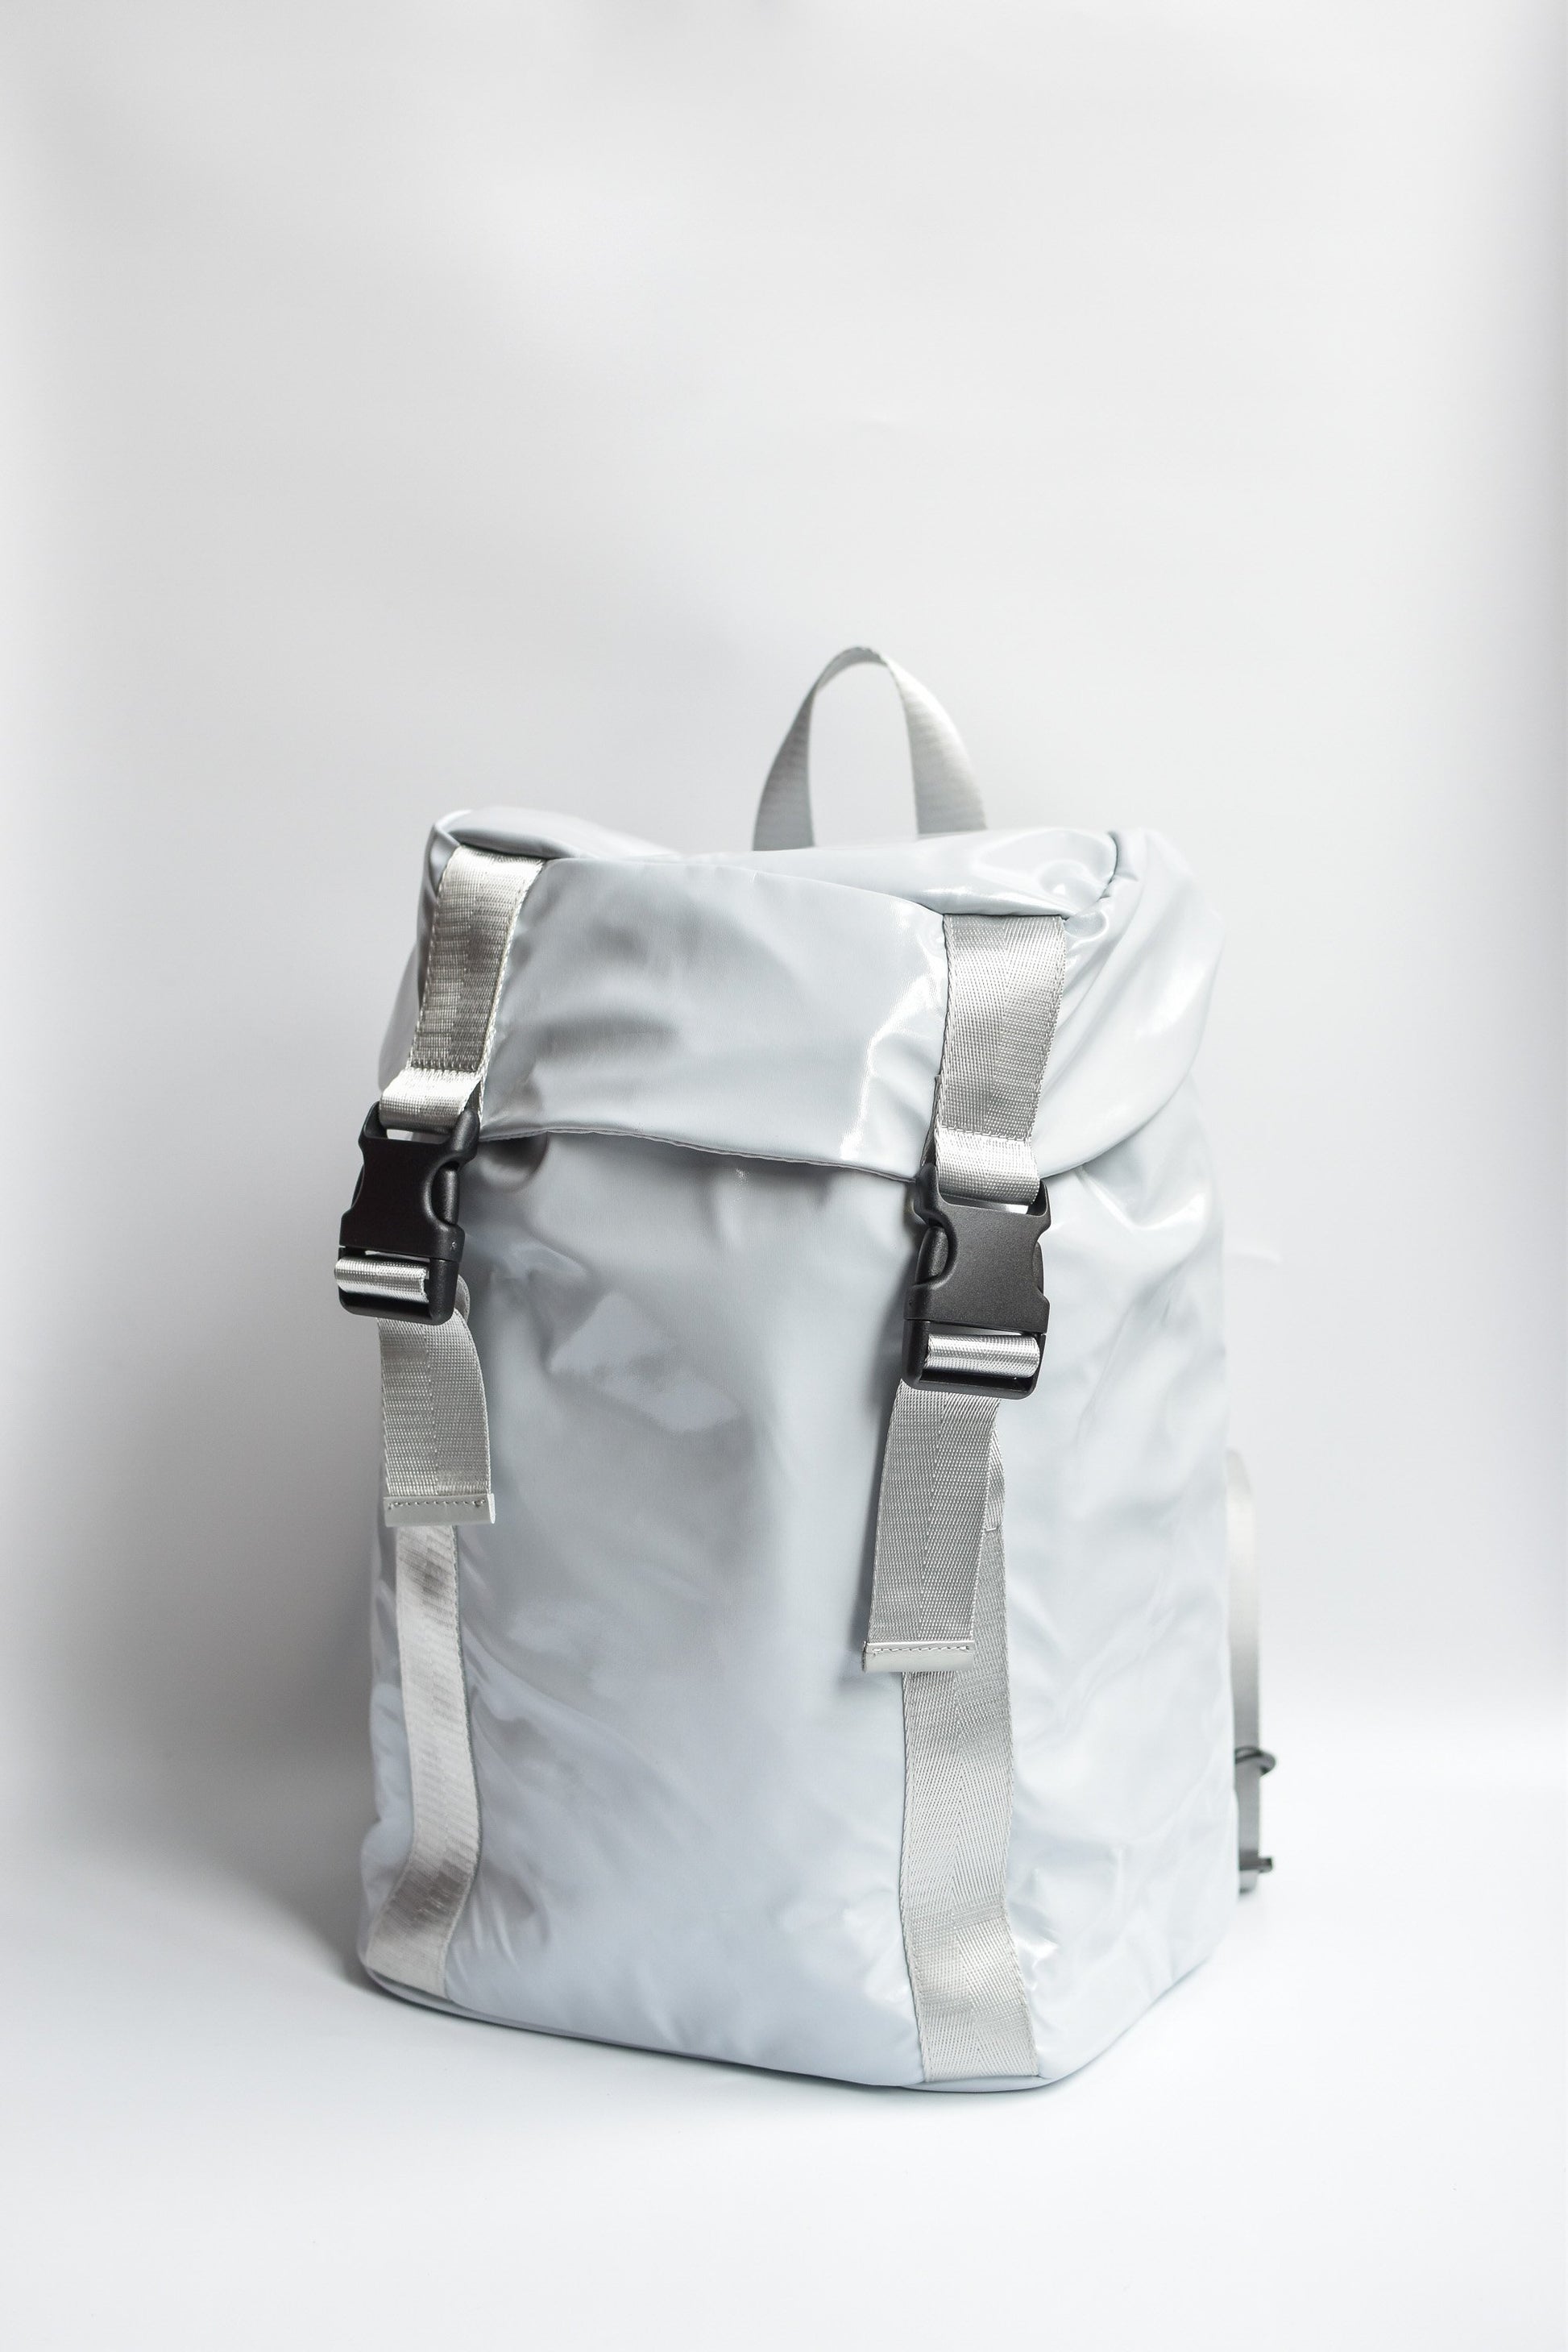 Gray high gloss backpack with gray leather and webbing details. 